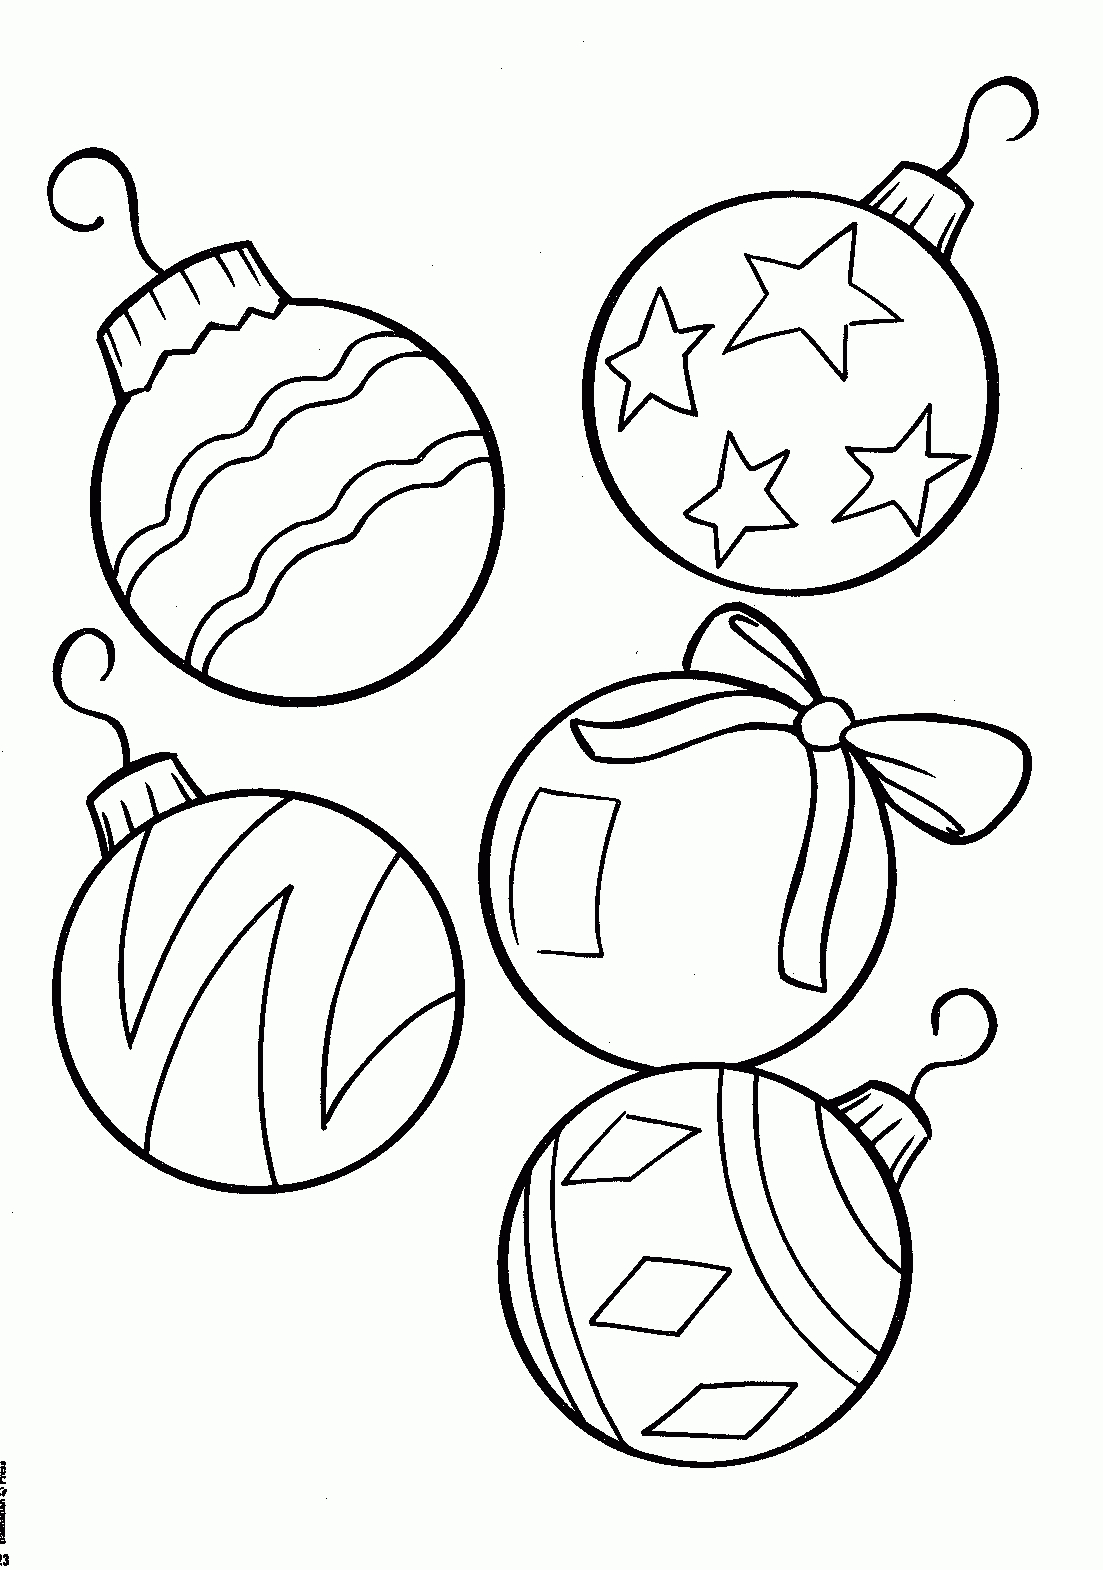 Ball Ornaments - Christmas Coloring Pages - Free Large Images - Free Printable Christmas Tree Ornaments Coloring Pages